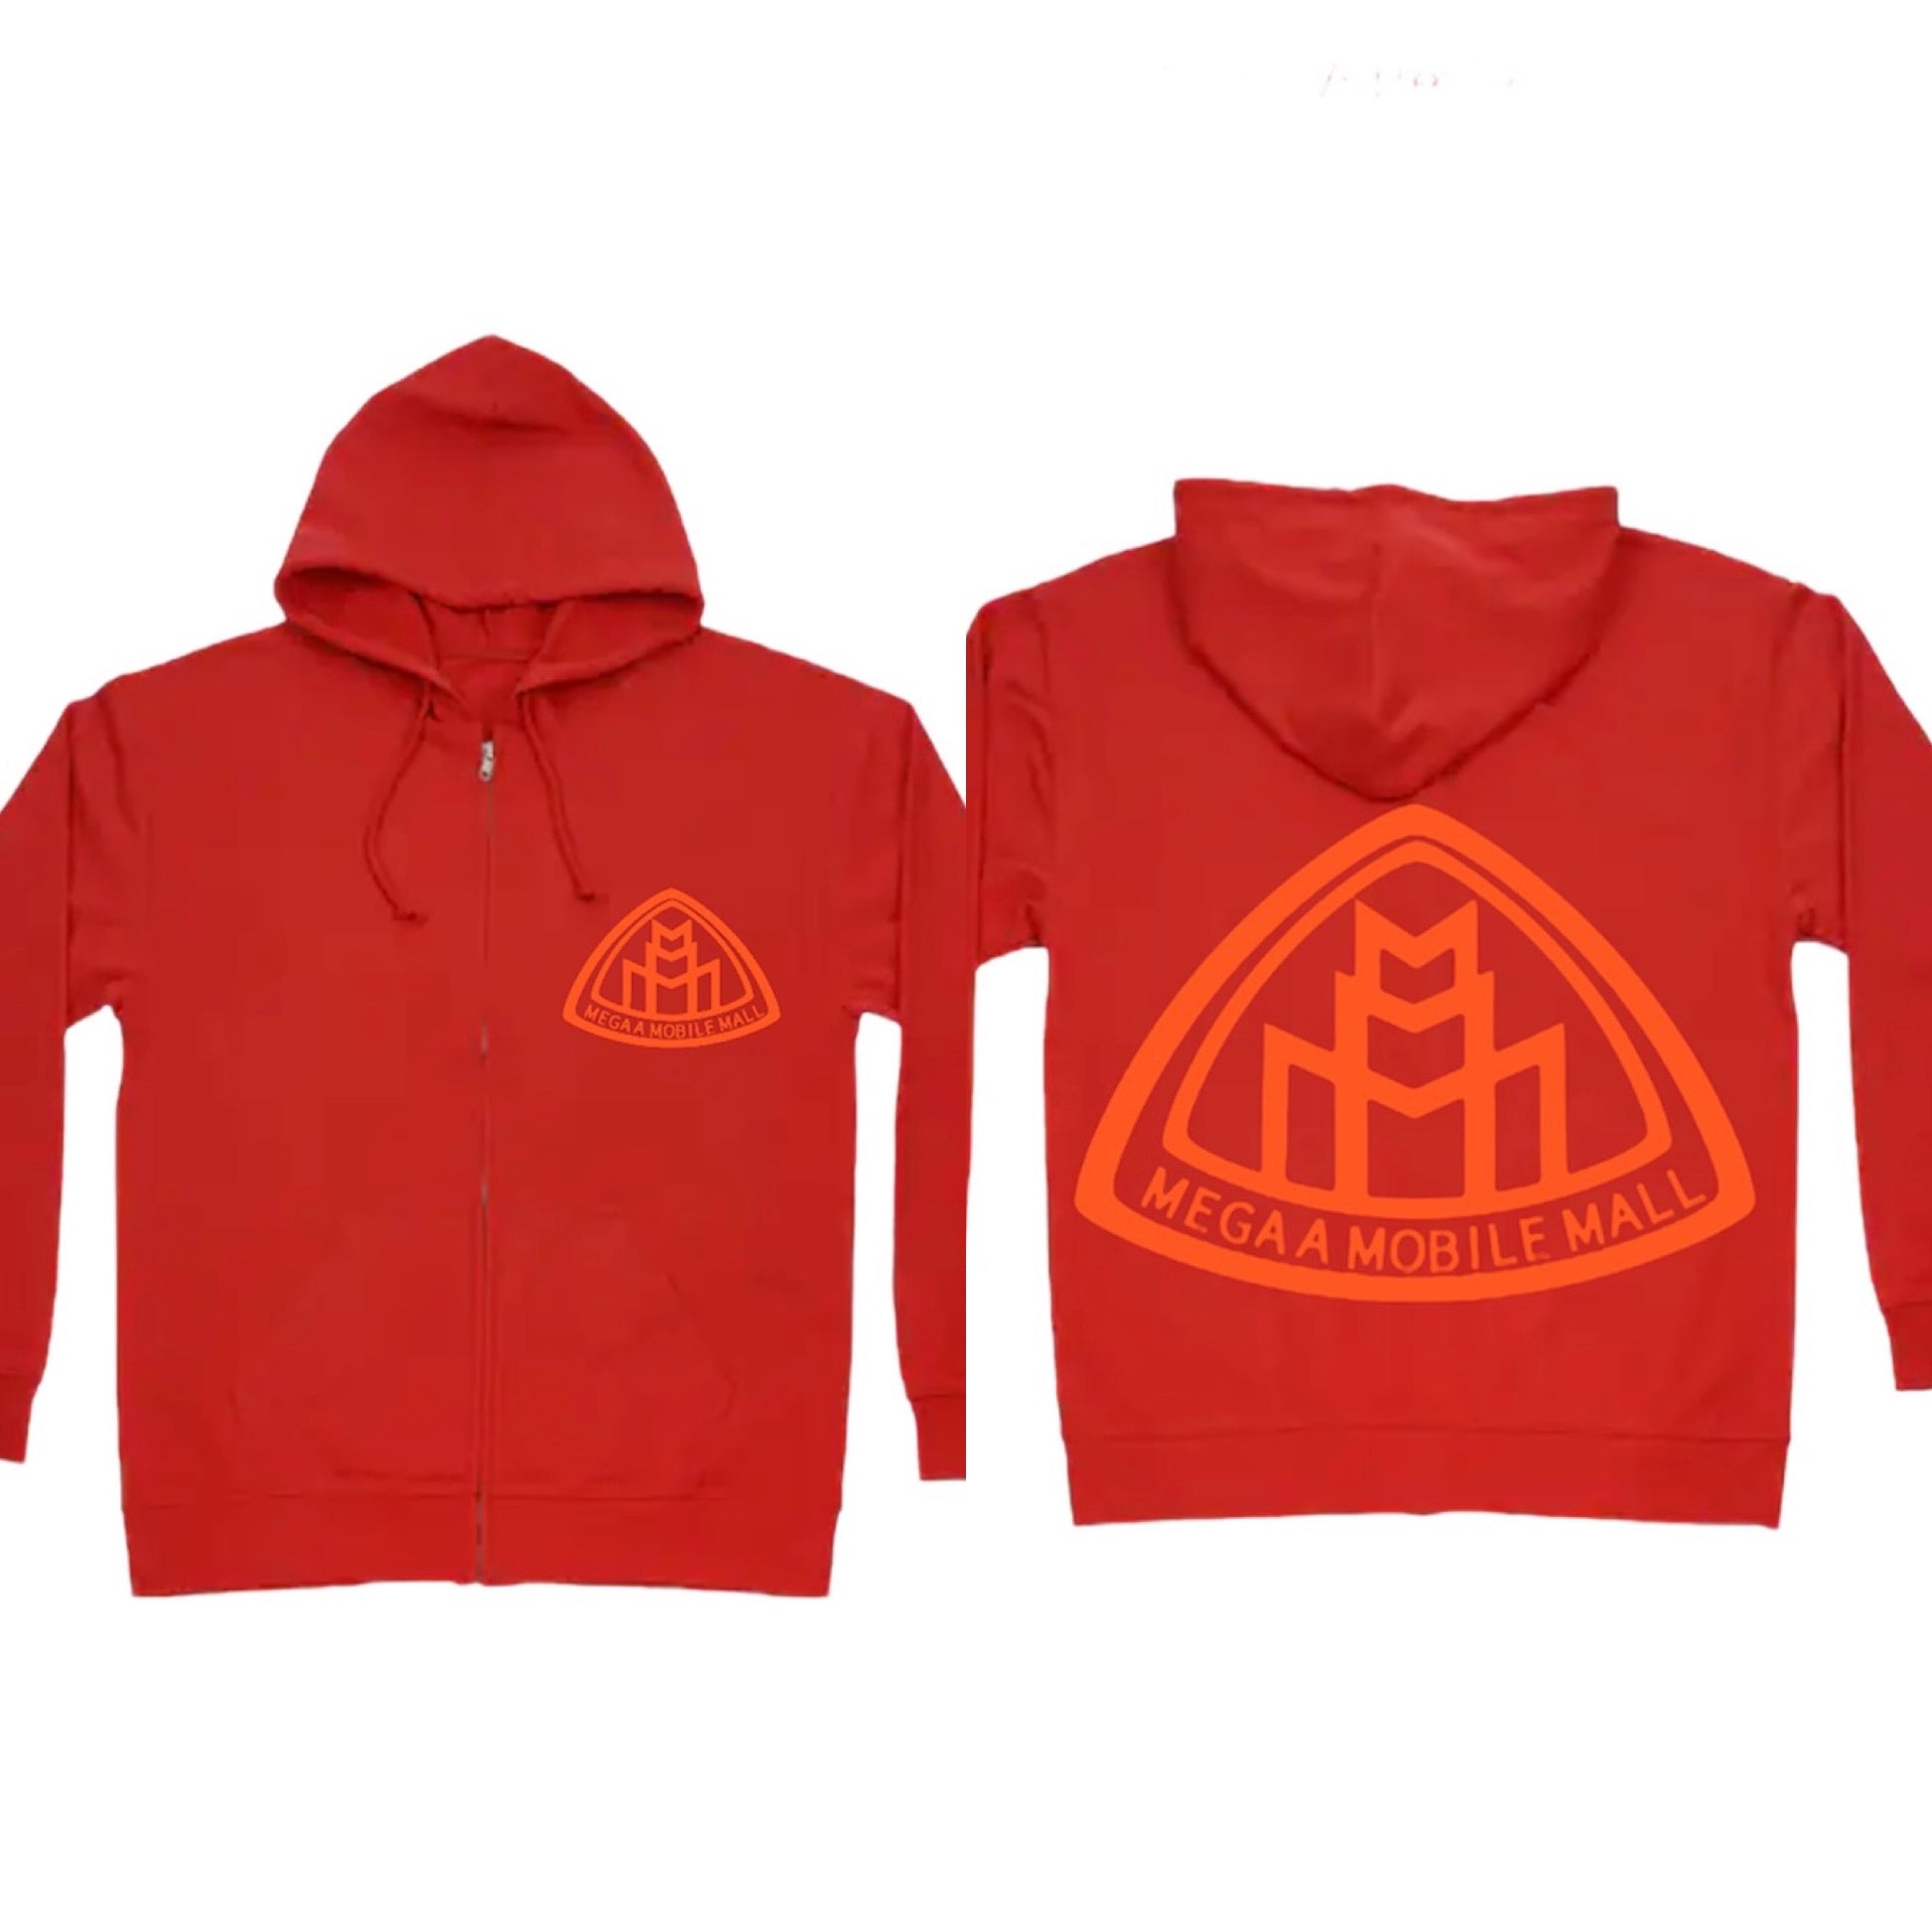 megaamobilemall red zip up hoodie with orange logo